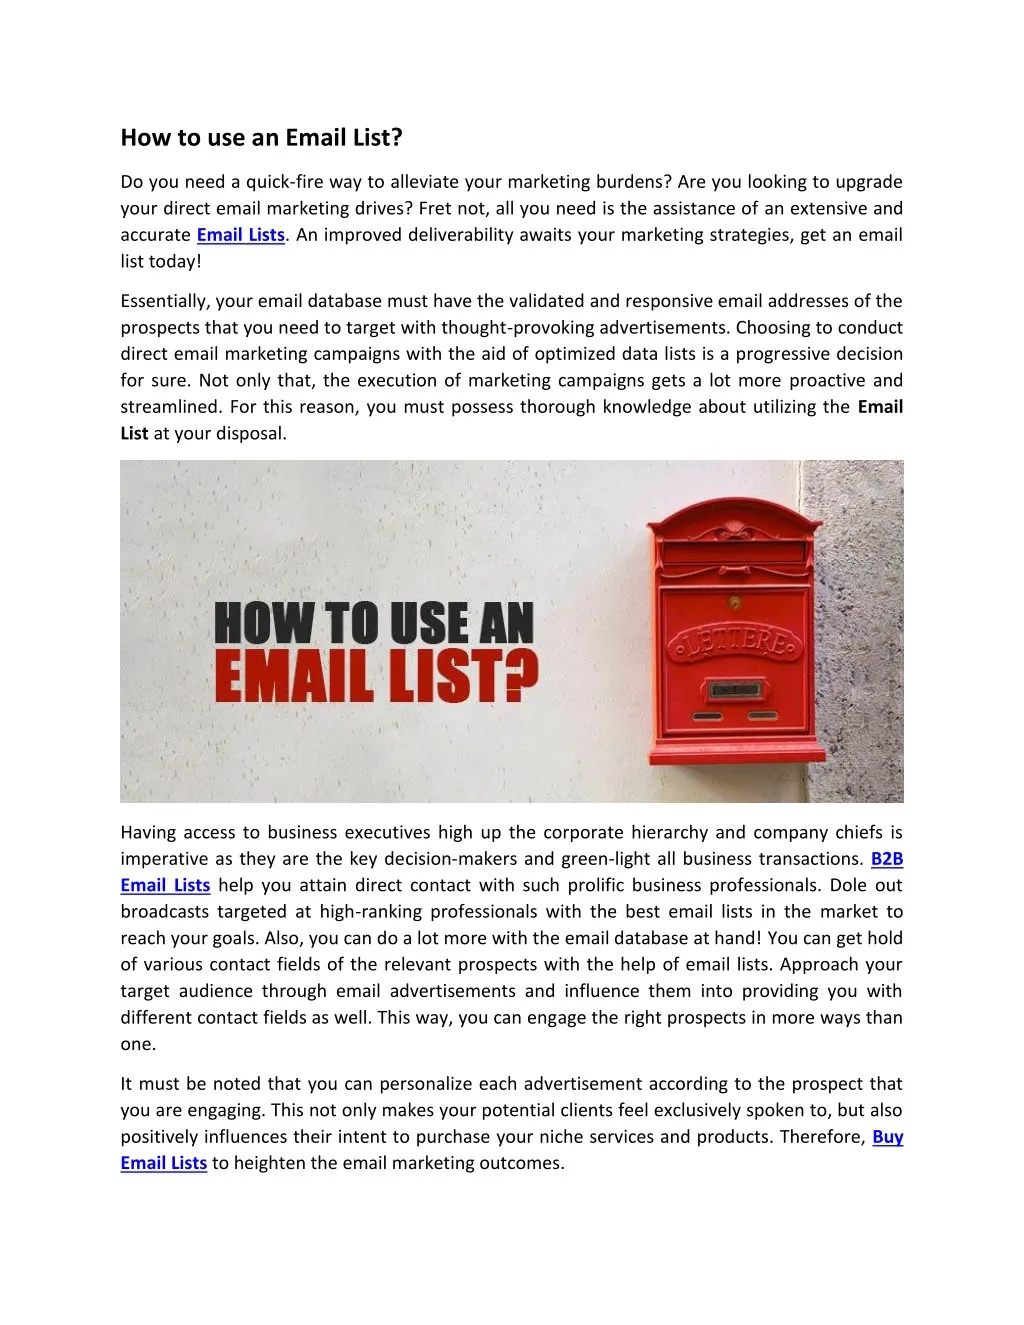 how to use an email list